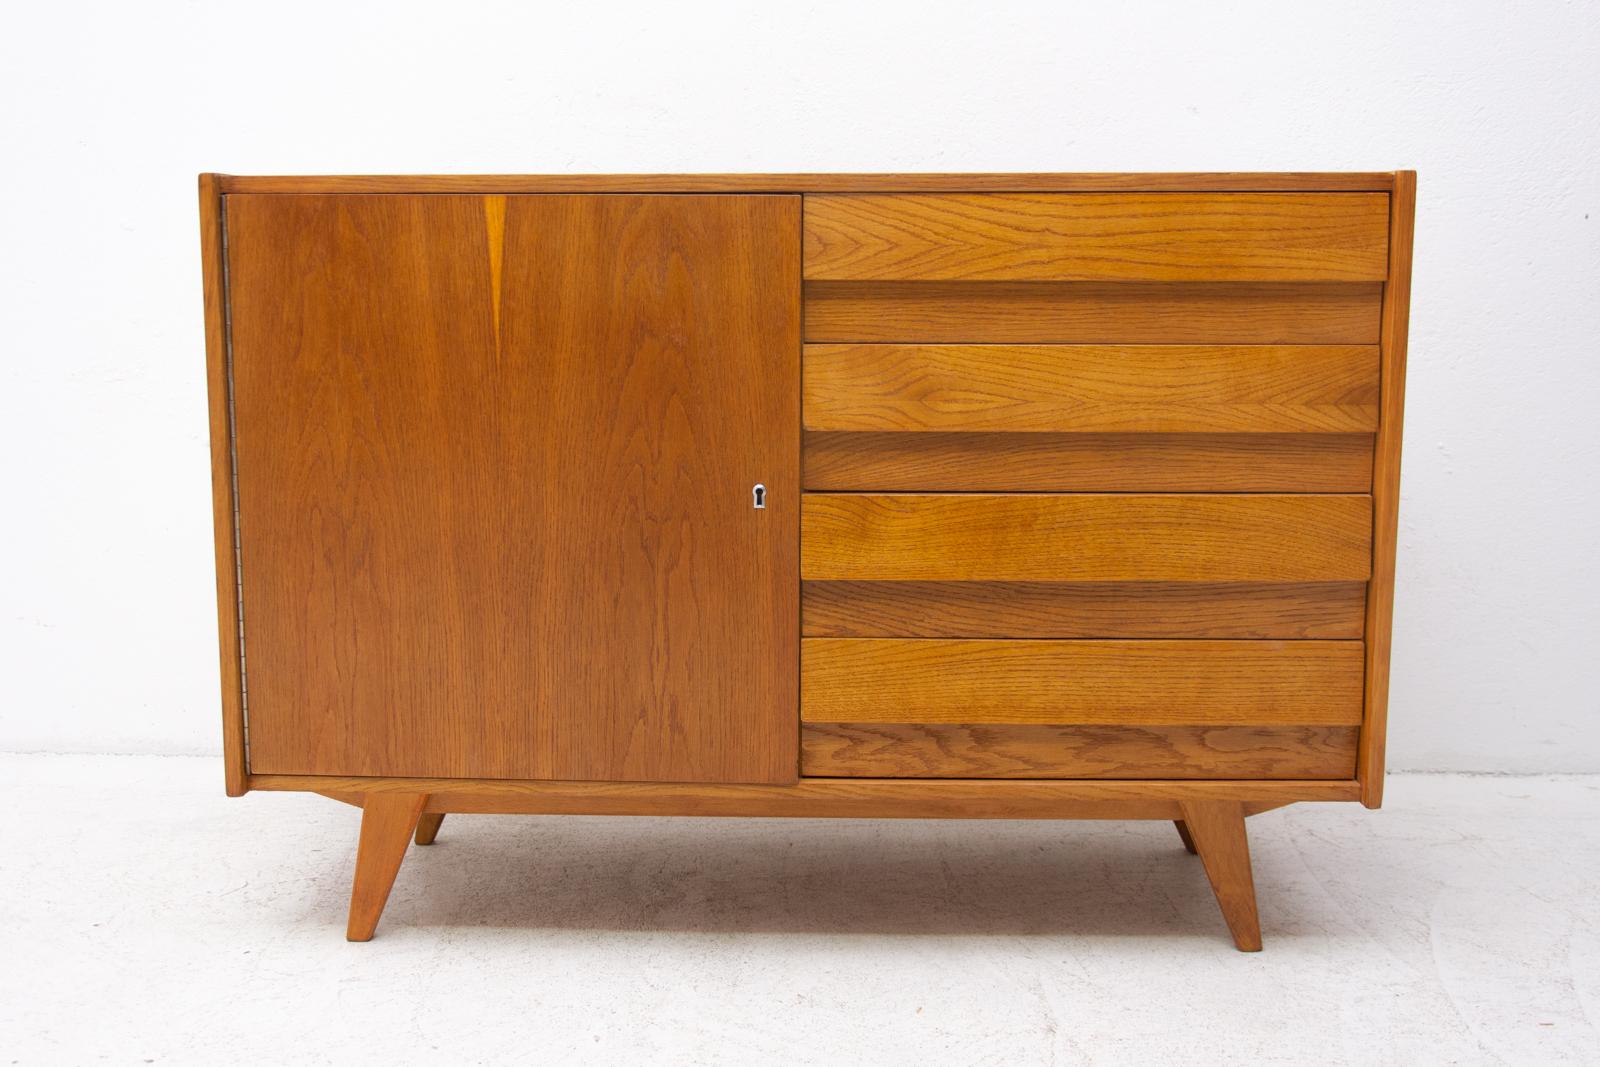 Midcentury chest of drawers, model no. U-458, designed by Jiri Jiroutek. It was made in the 1960s and produced by “Interier Praha”. This model associated with world-renowned EXPO 58-“Brussels period”. It features Beech wood, plywood, veneered